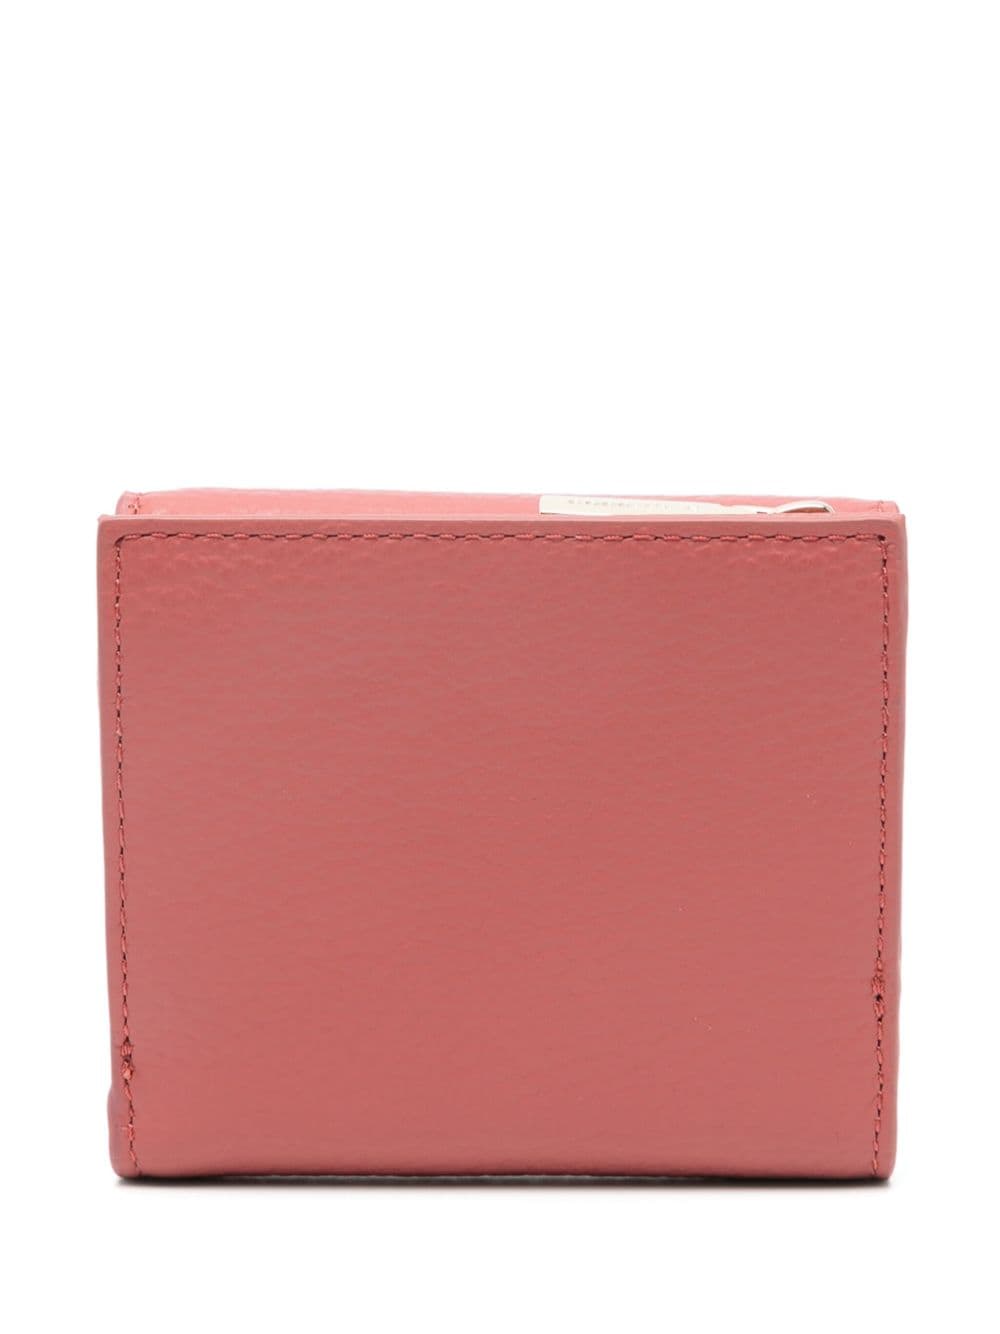 Coccinelle small Metallic Soft leather wallet - Roze